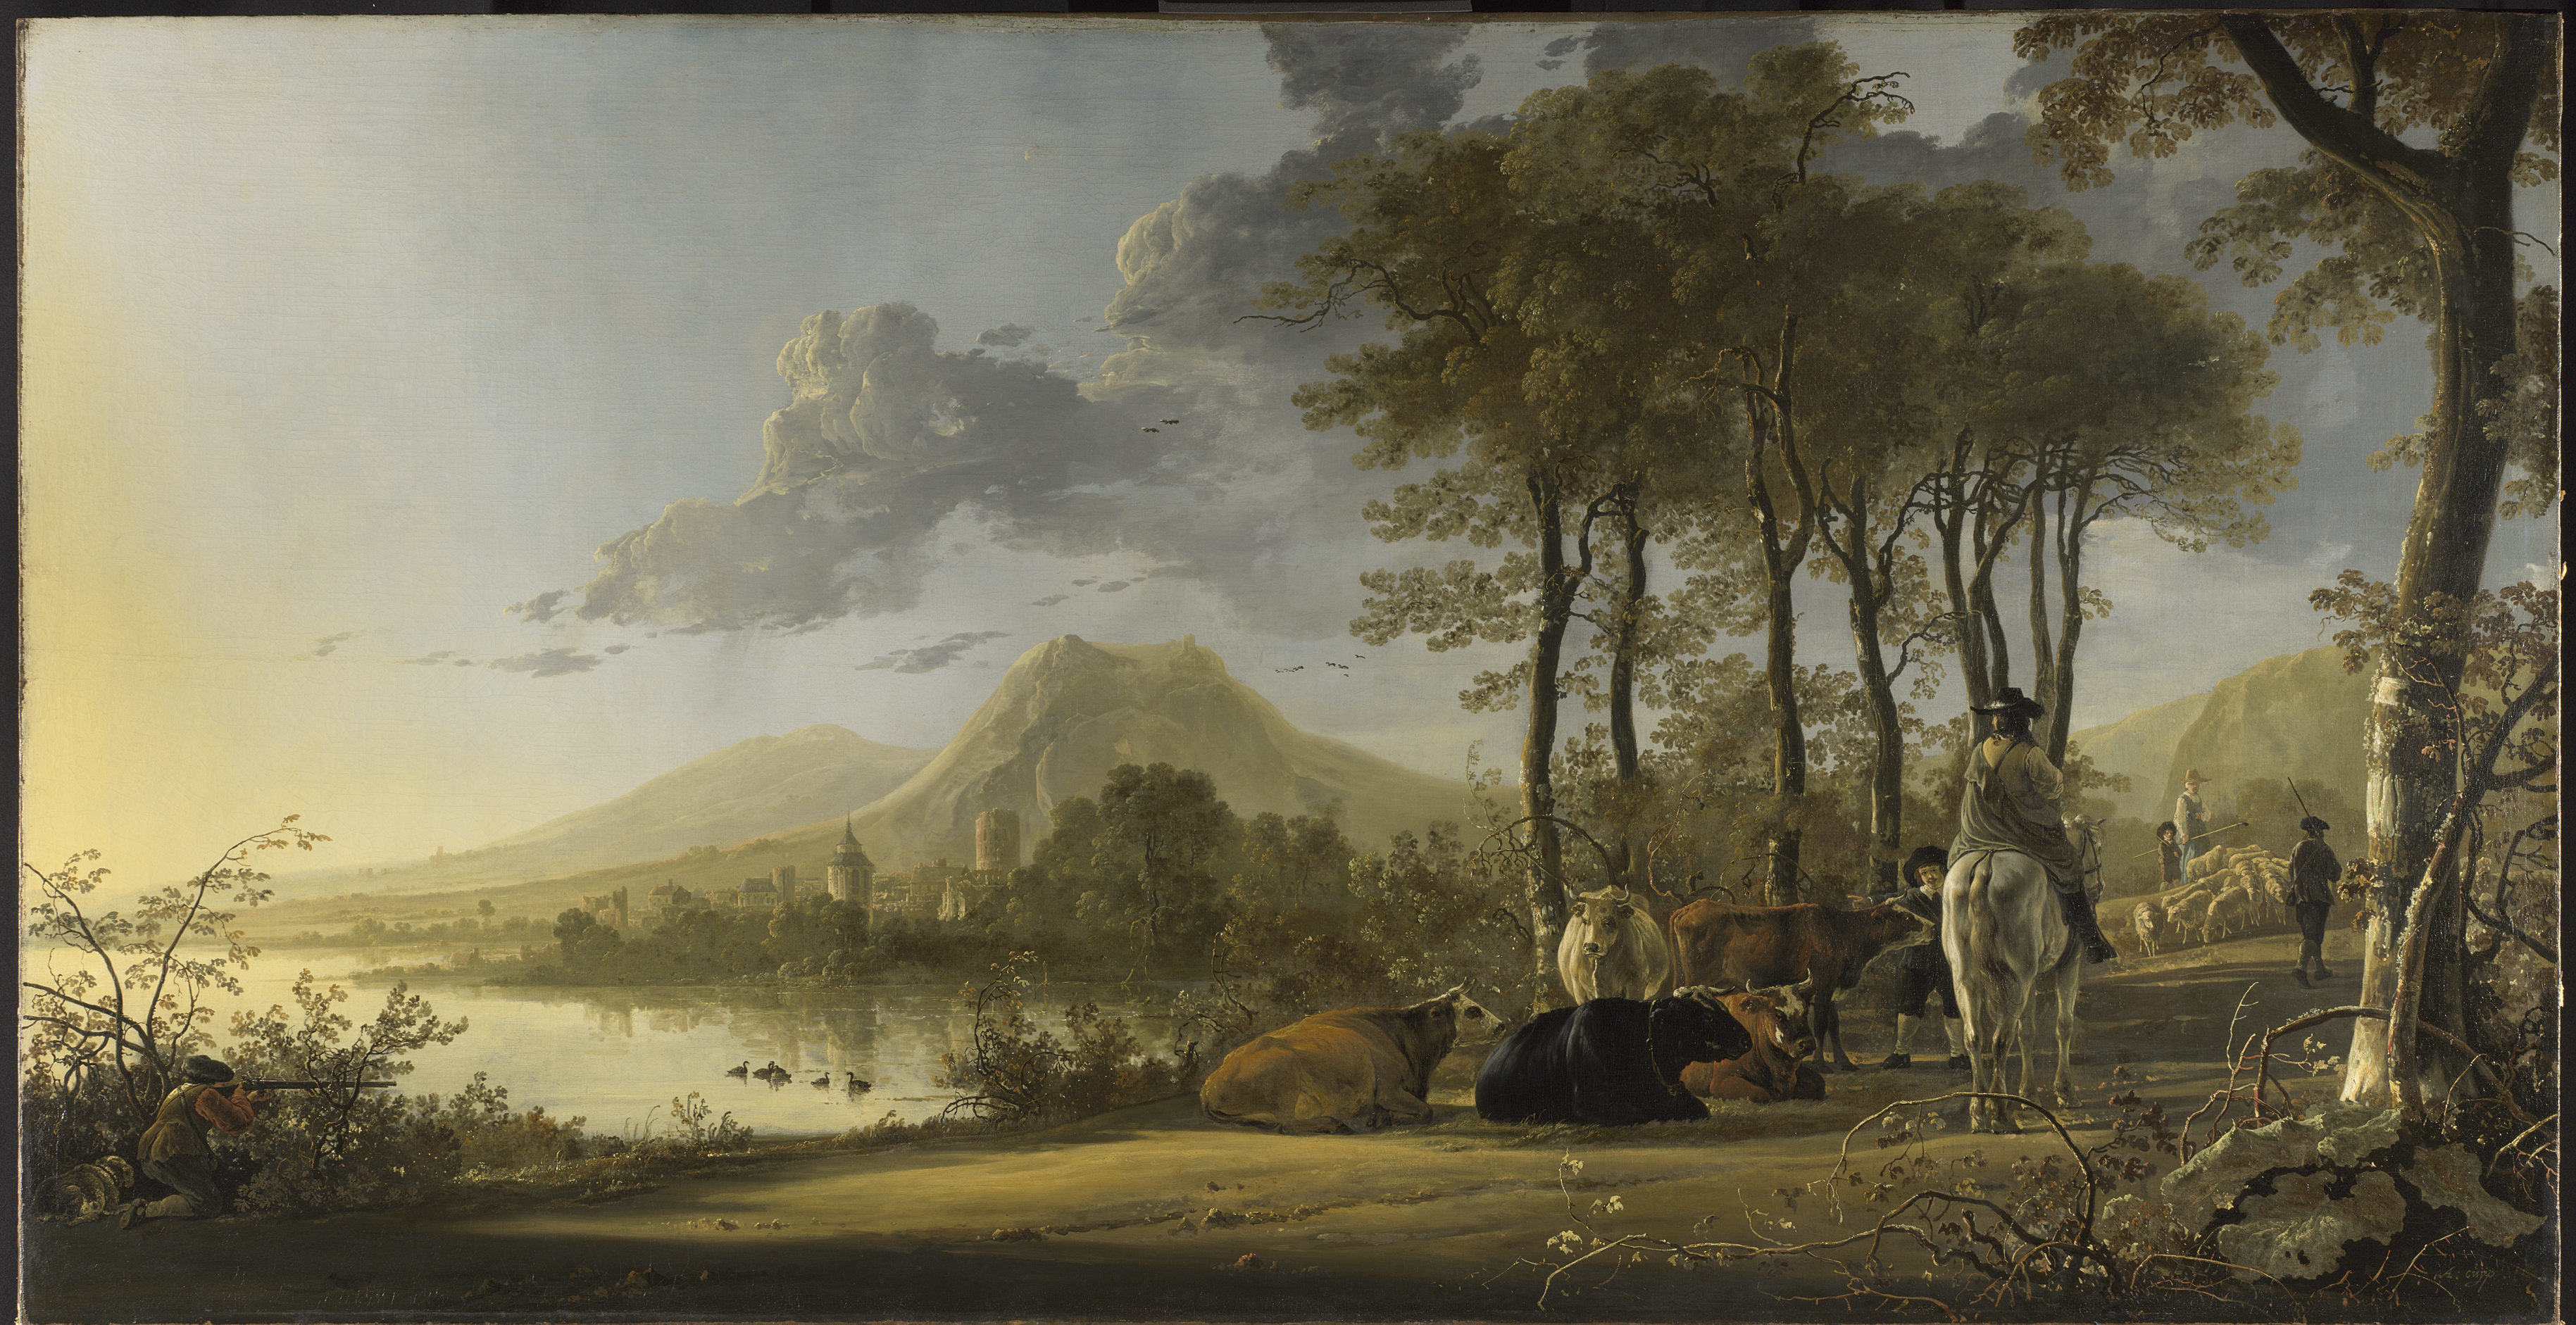 Afb 1 Aelbert Cuyp River Landscape with NG 6522